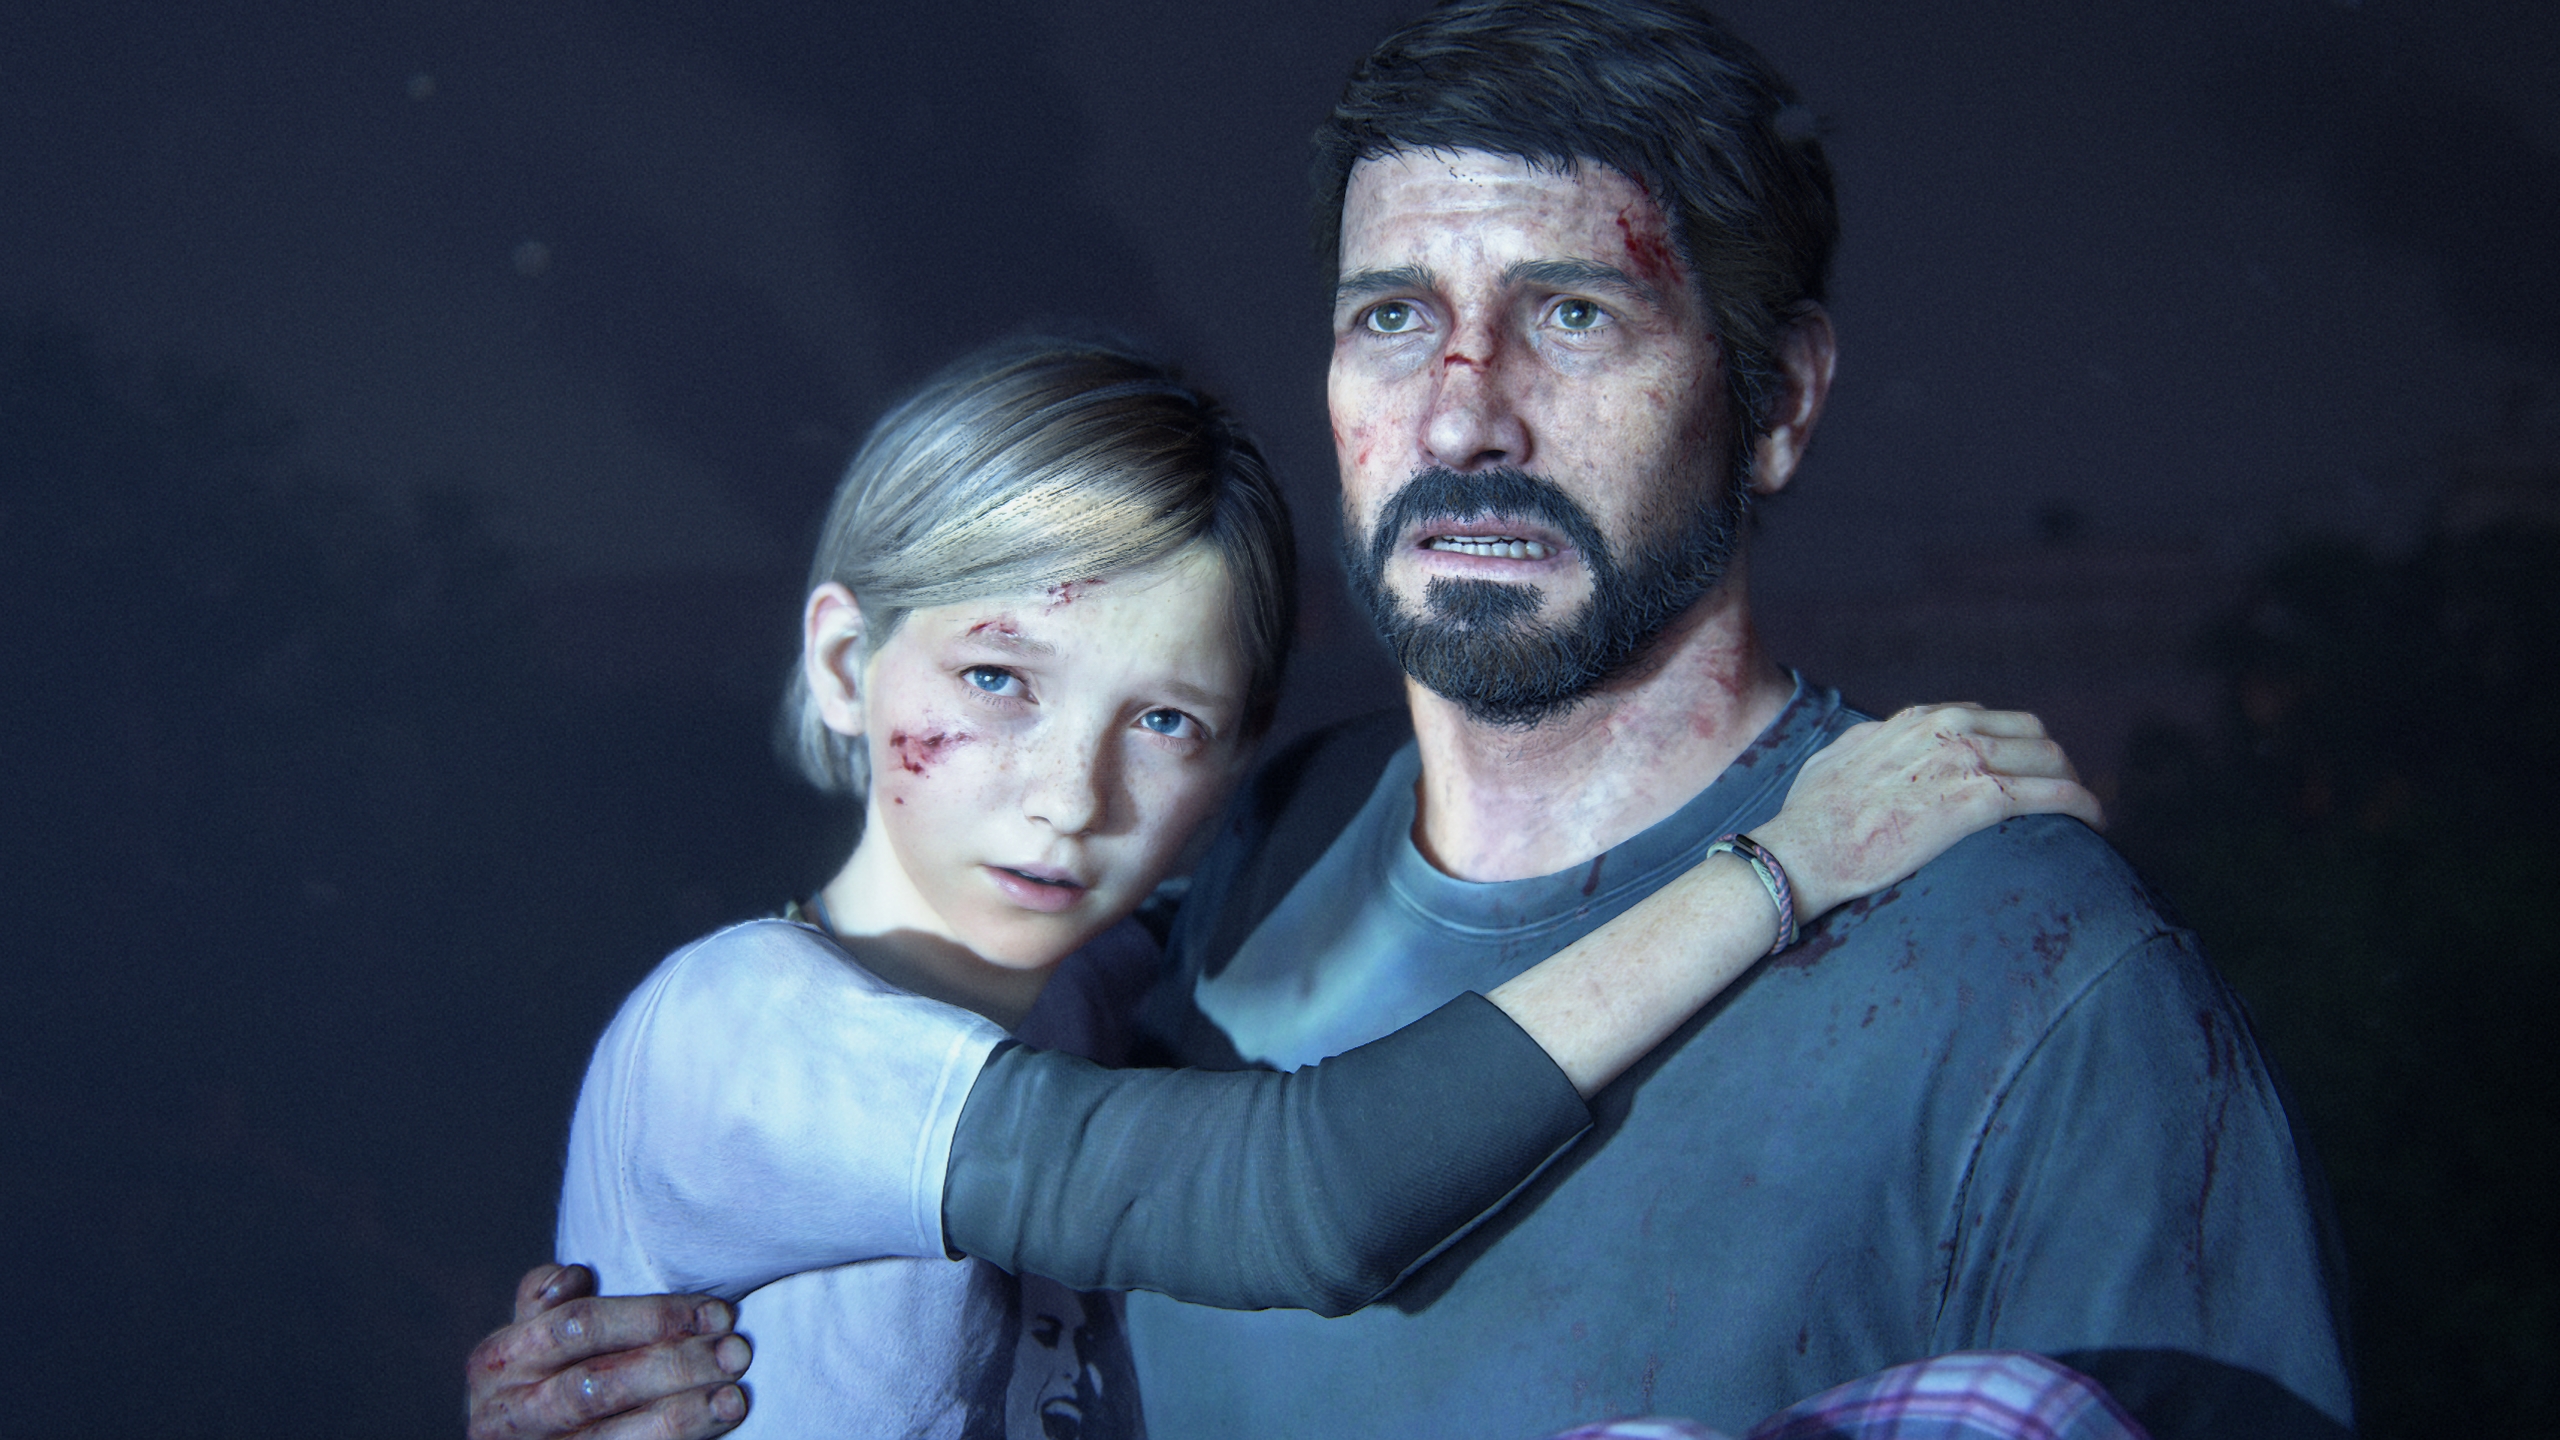 The Last Of Us Part 1's PC Port Has Naughty Dog Teaming Up With Another Dev